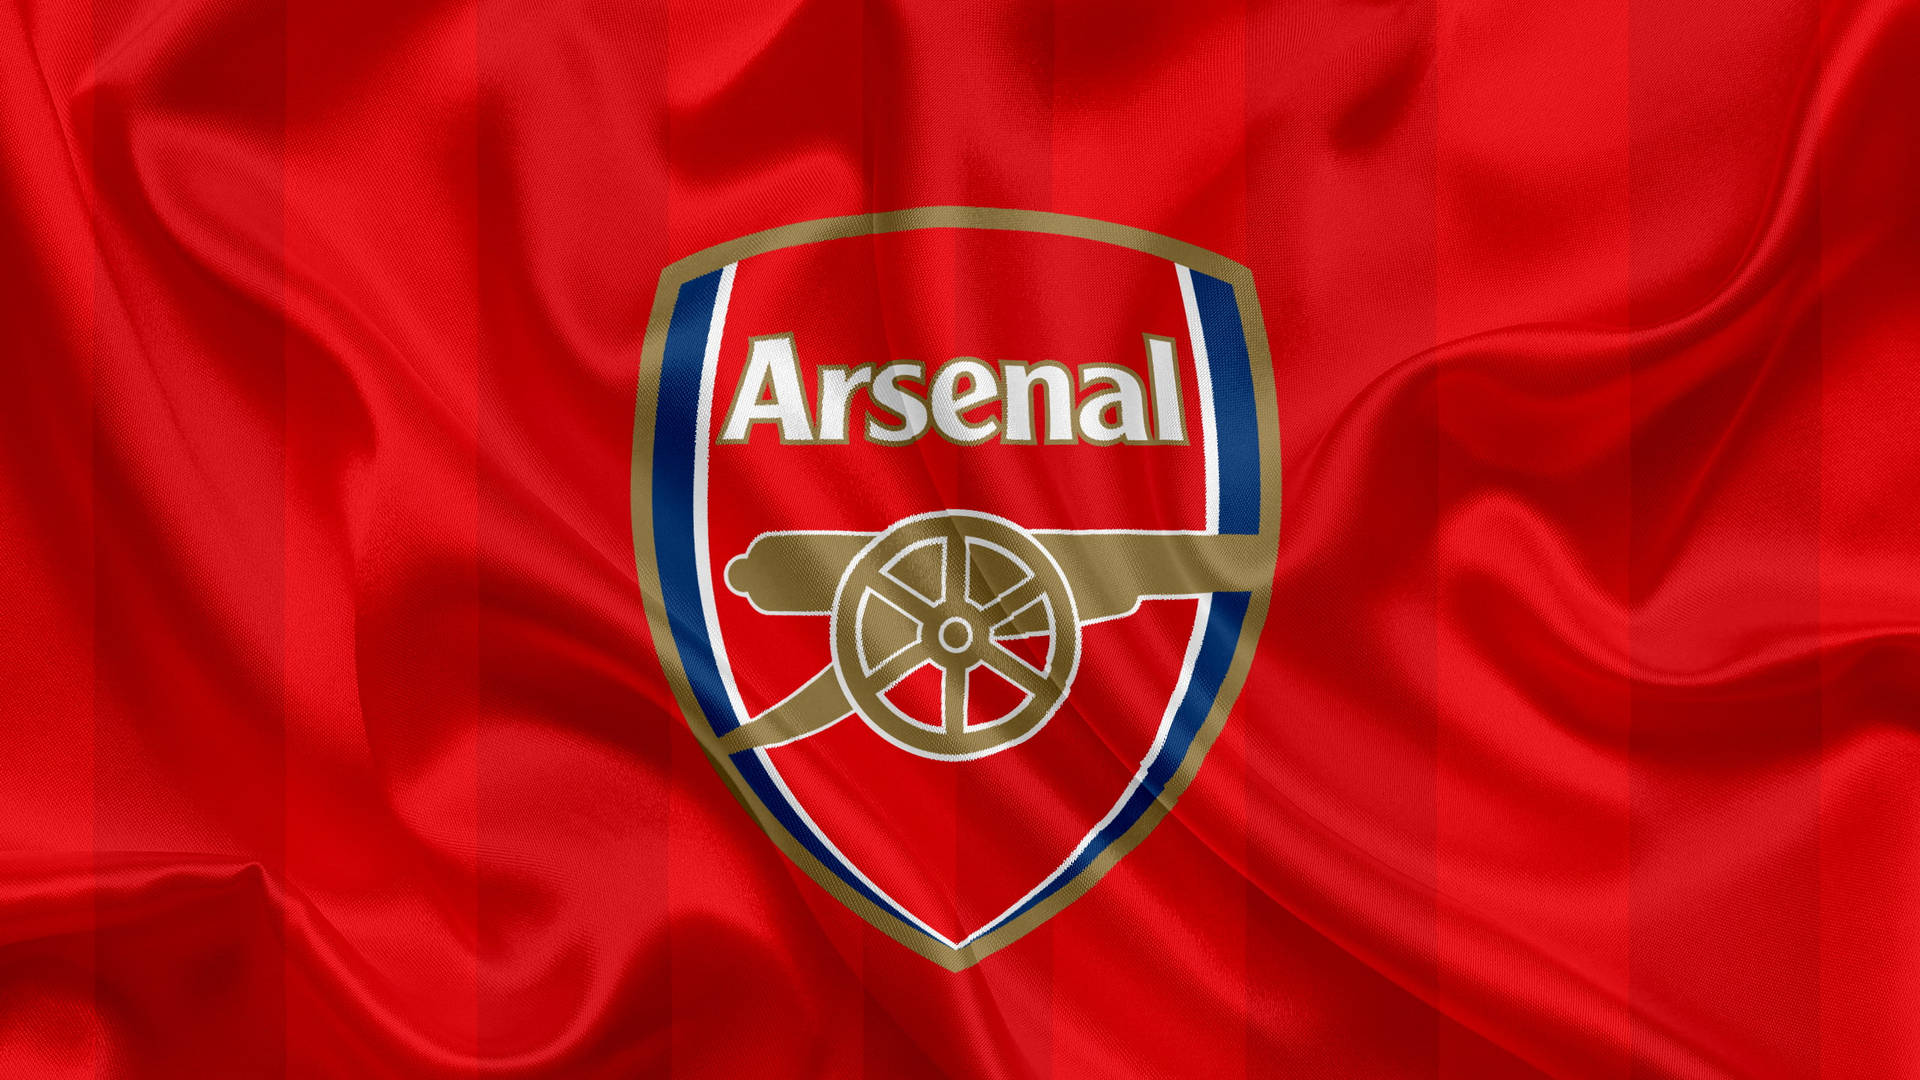 Free Arsenal Picture Wallpaper Downloads, Arsenal Picture Wallpaper for FREE